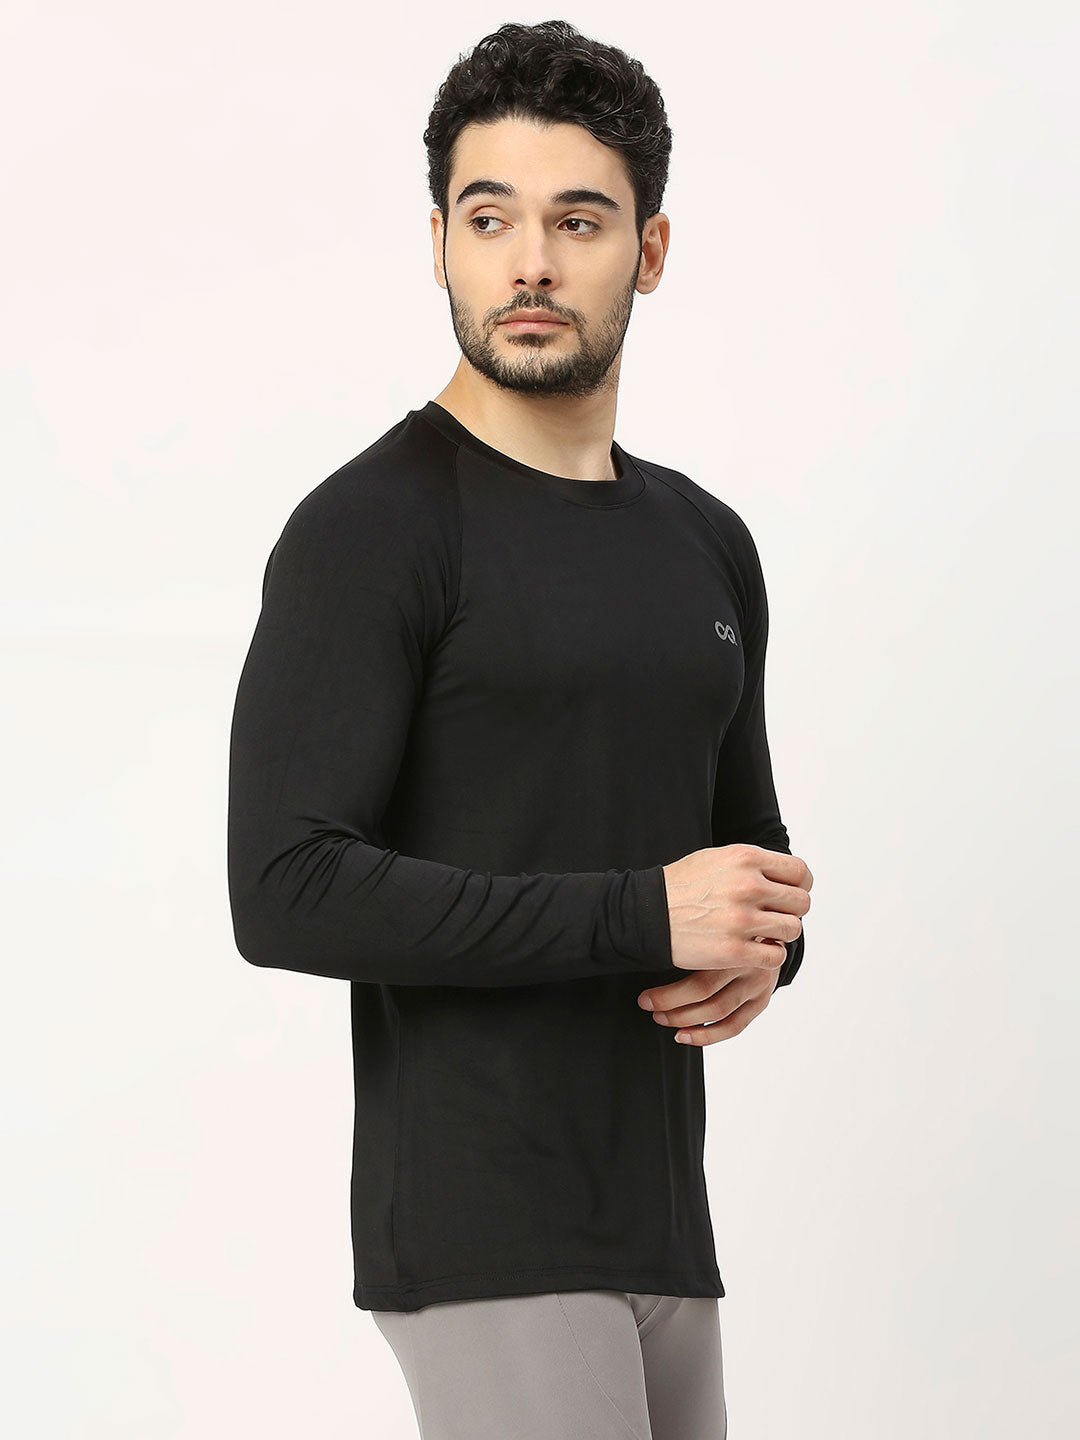 Shop Men's Long Sleeve Black Sports T-Shirt - Stay Cool and